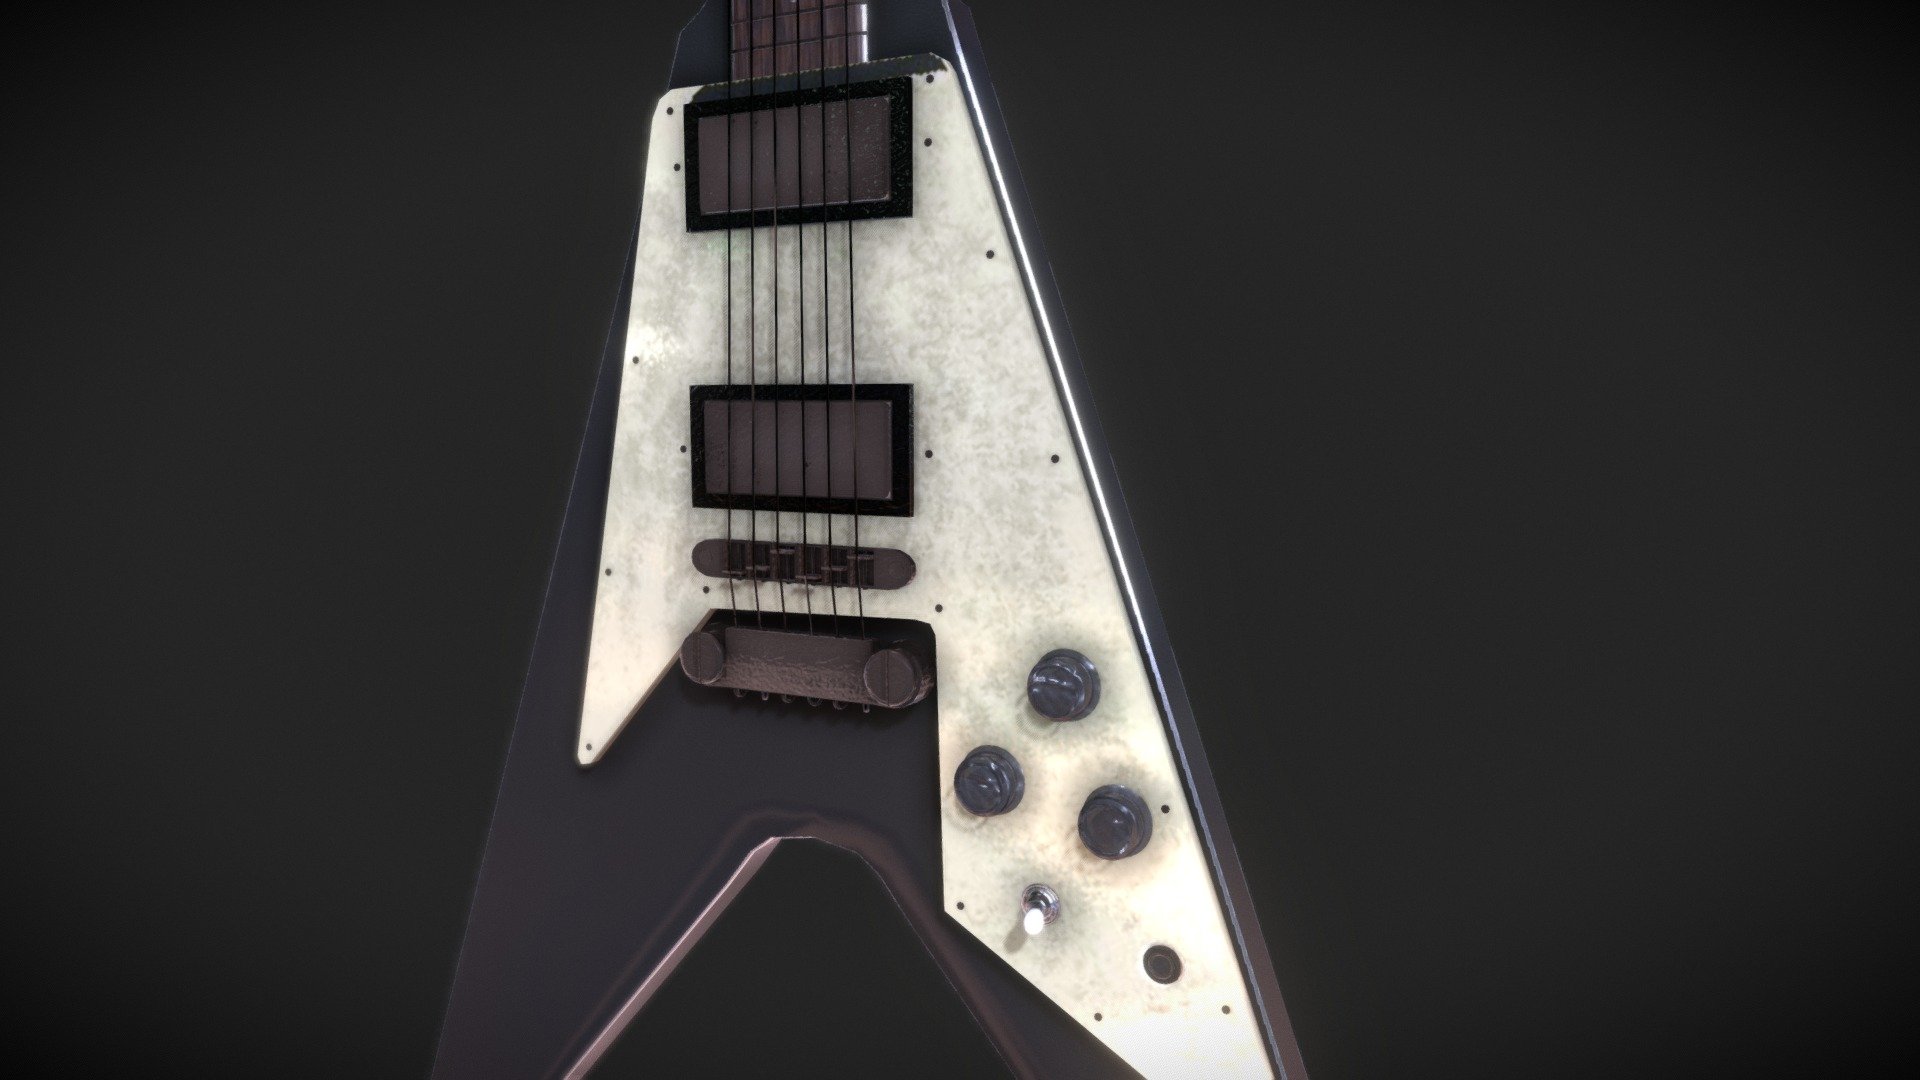 3D Low Poly game ready model, and render ready of a electric guitar, with finished interior and ready to animate (not animated).

Created with Blender 2.91.
Textured in Substance Painter.
Faces: 19k. Verts: 18k 3d model